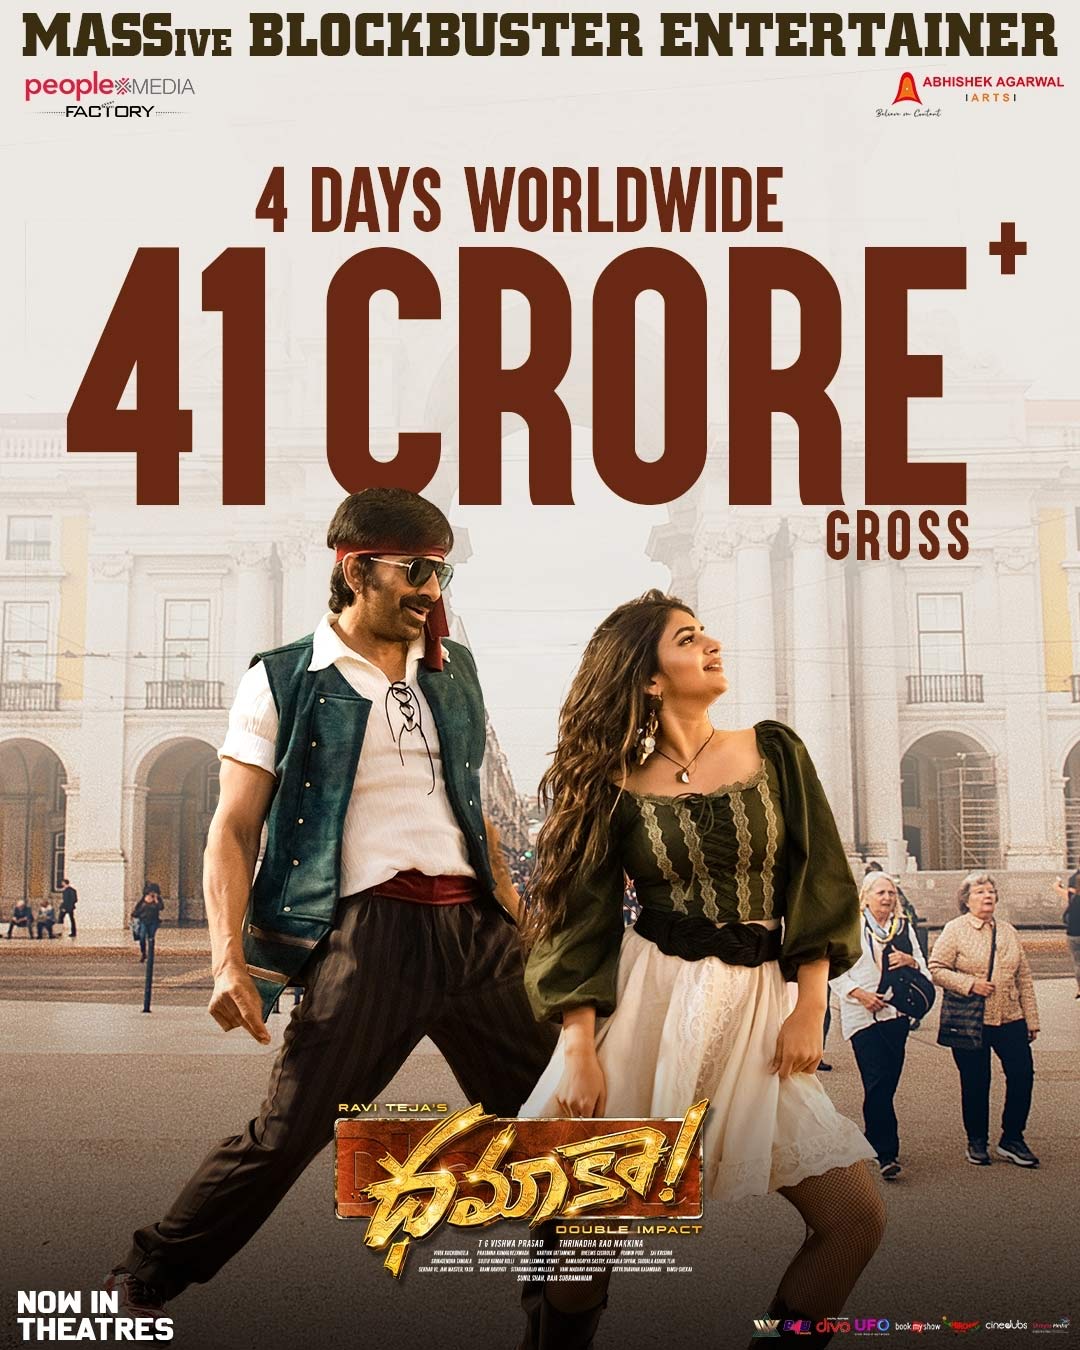 Dhamaka Collected 41 Cr + Gross Worldwide In 4 Days